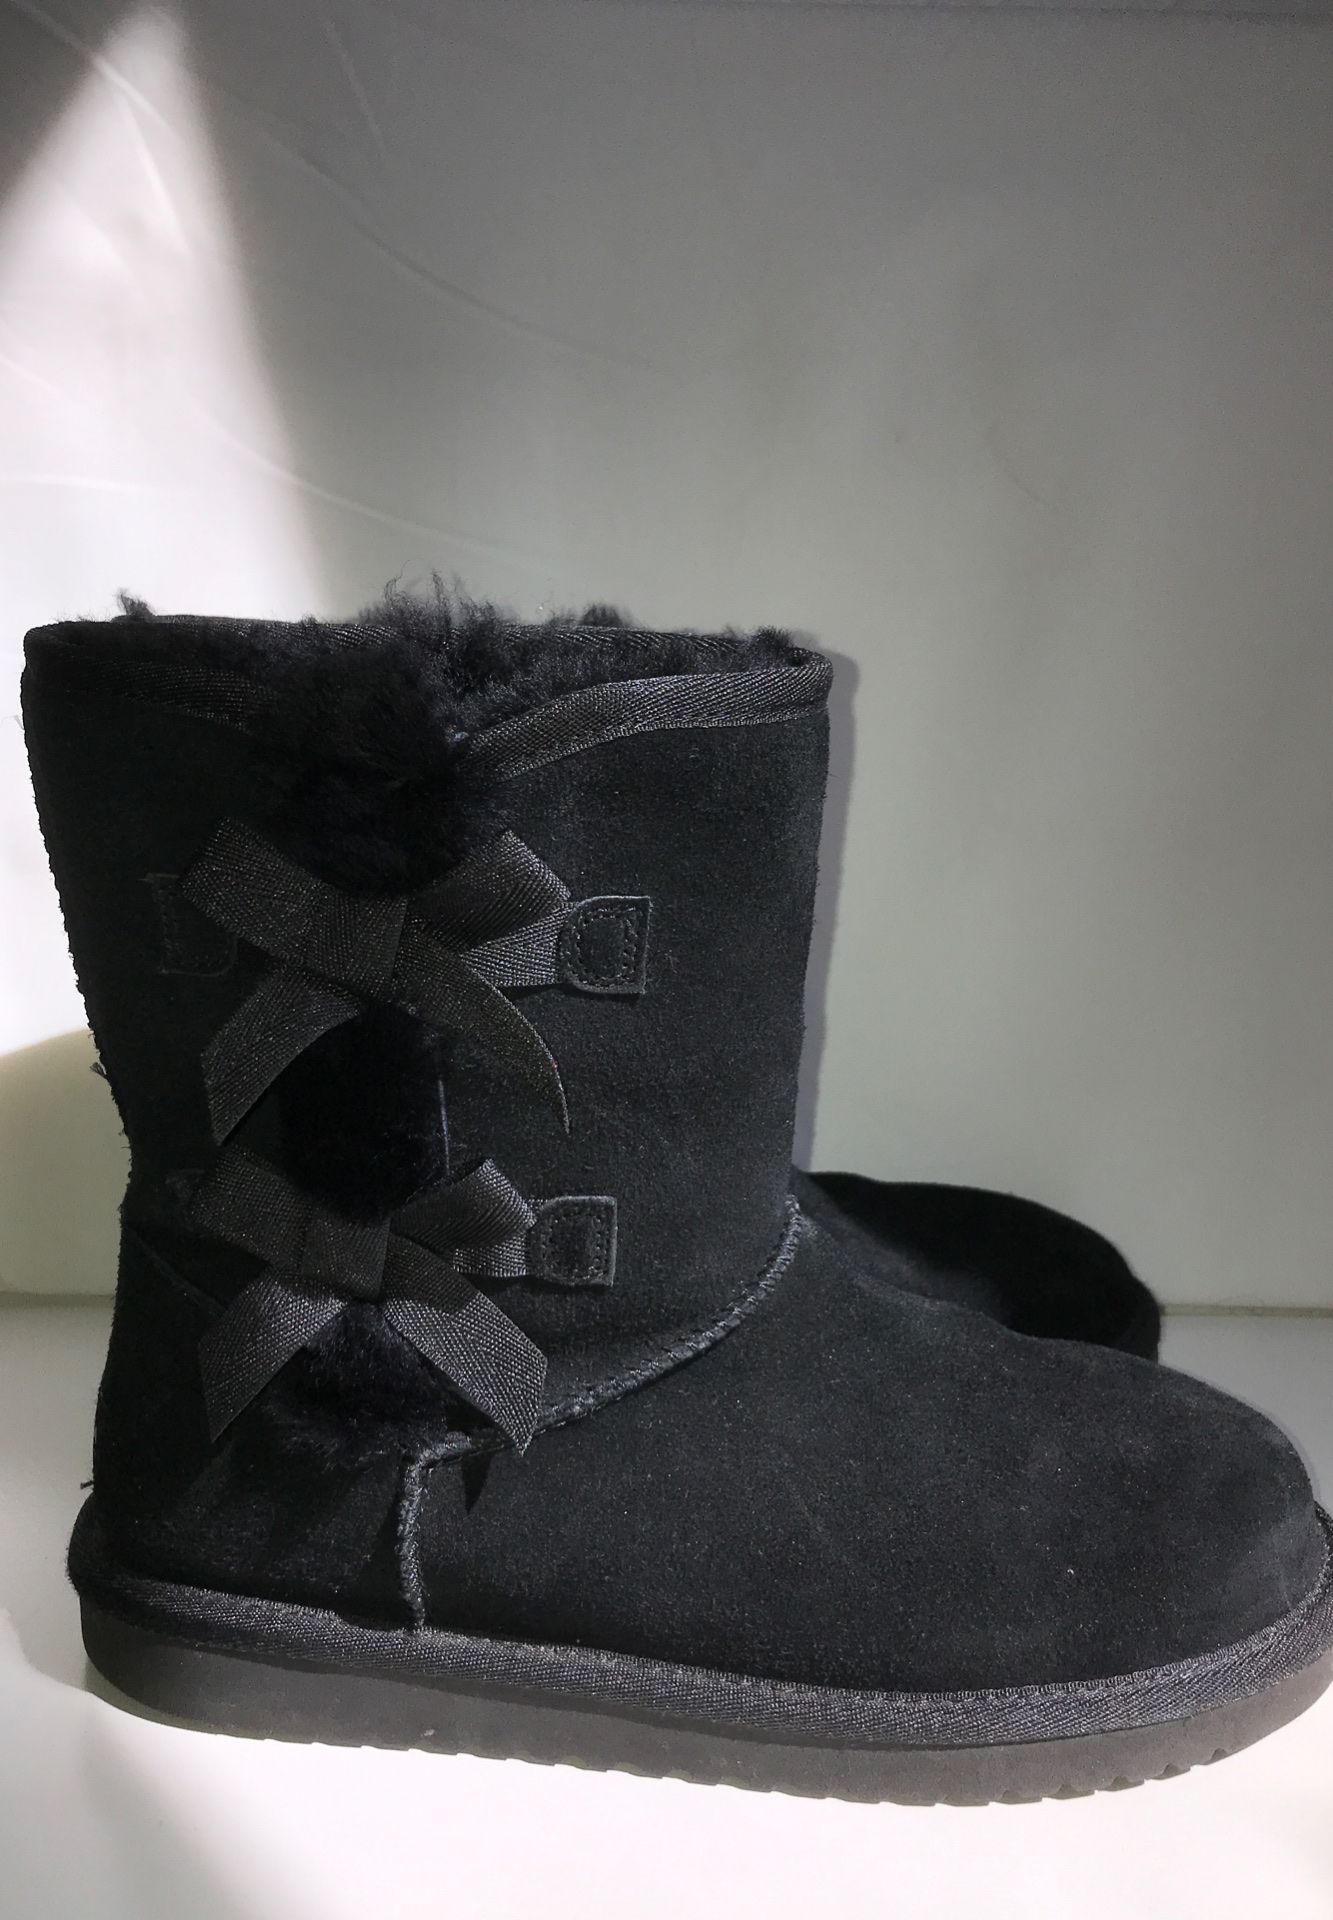 Uggs size 8